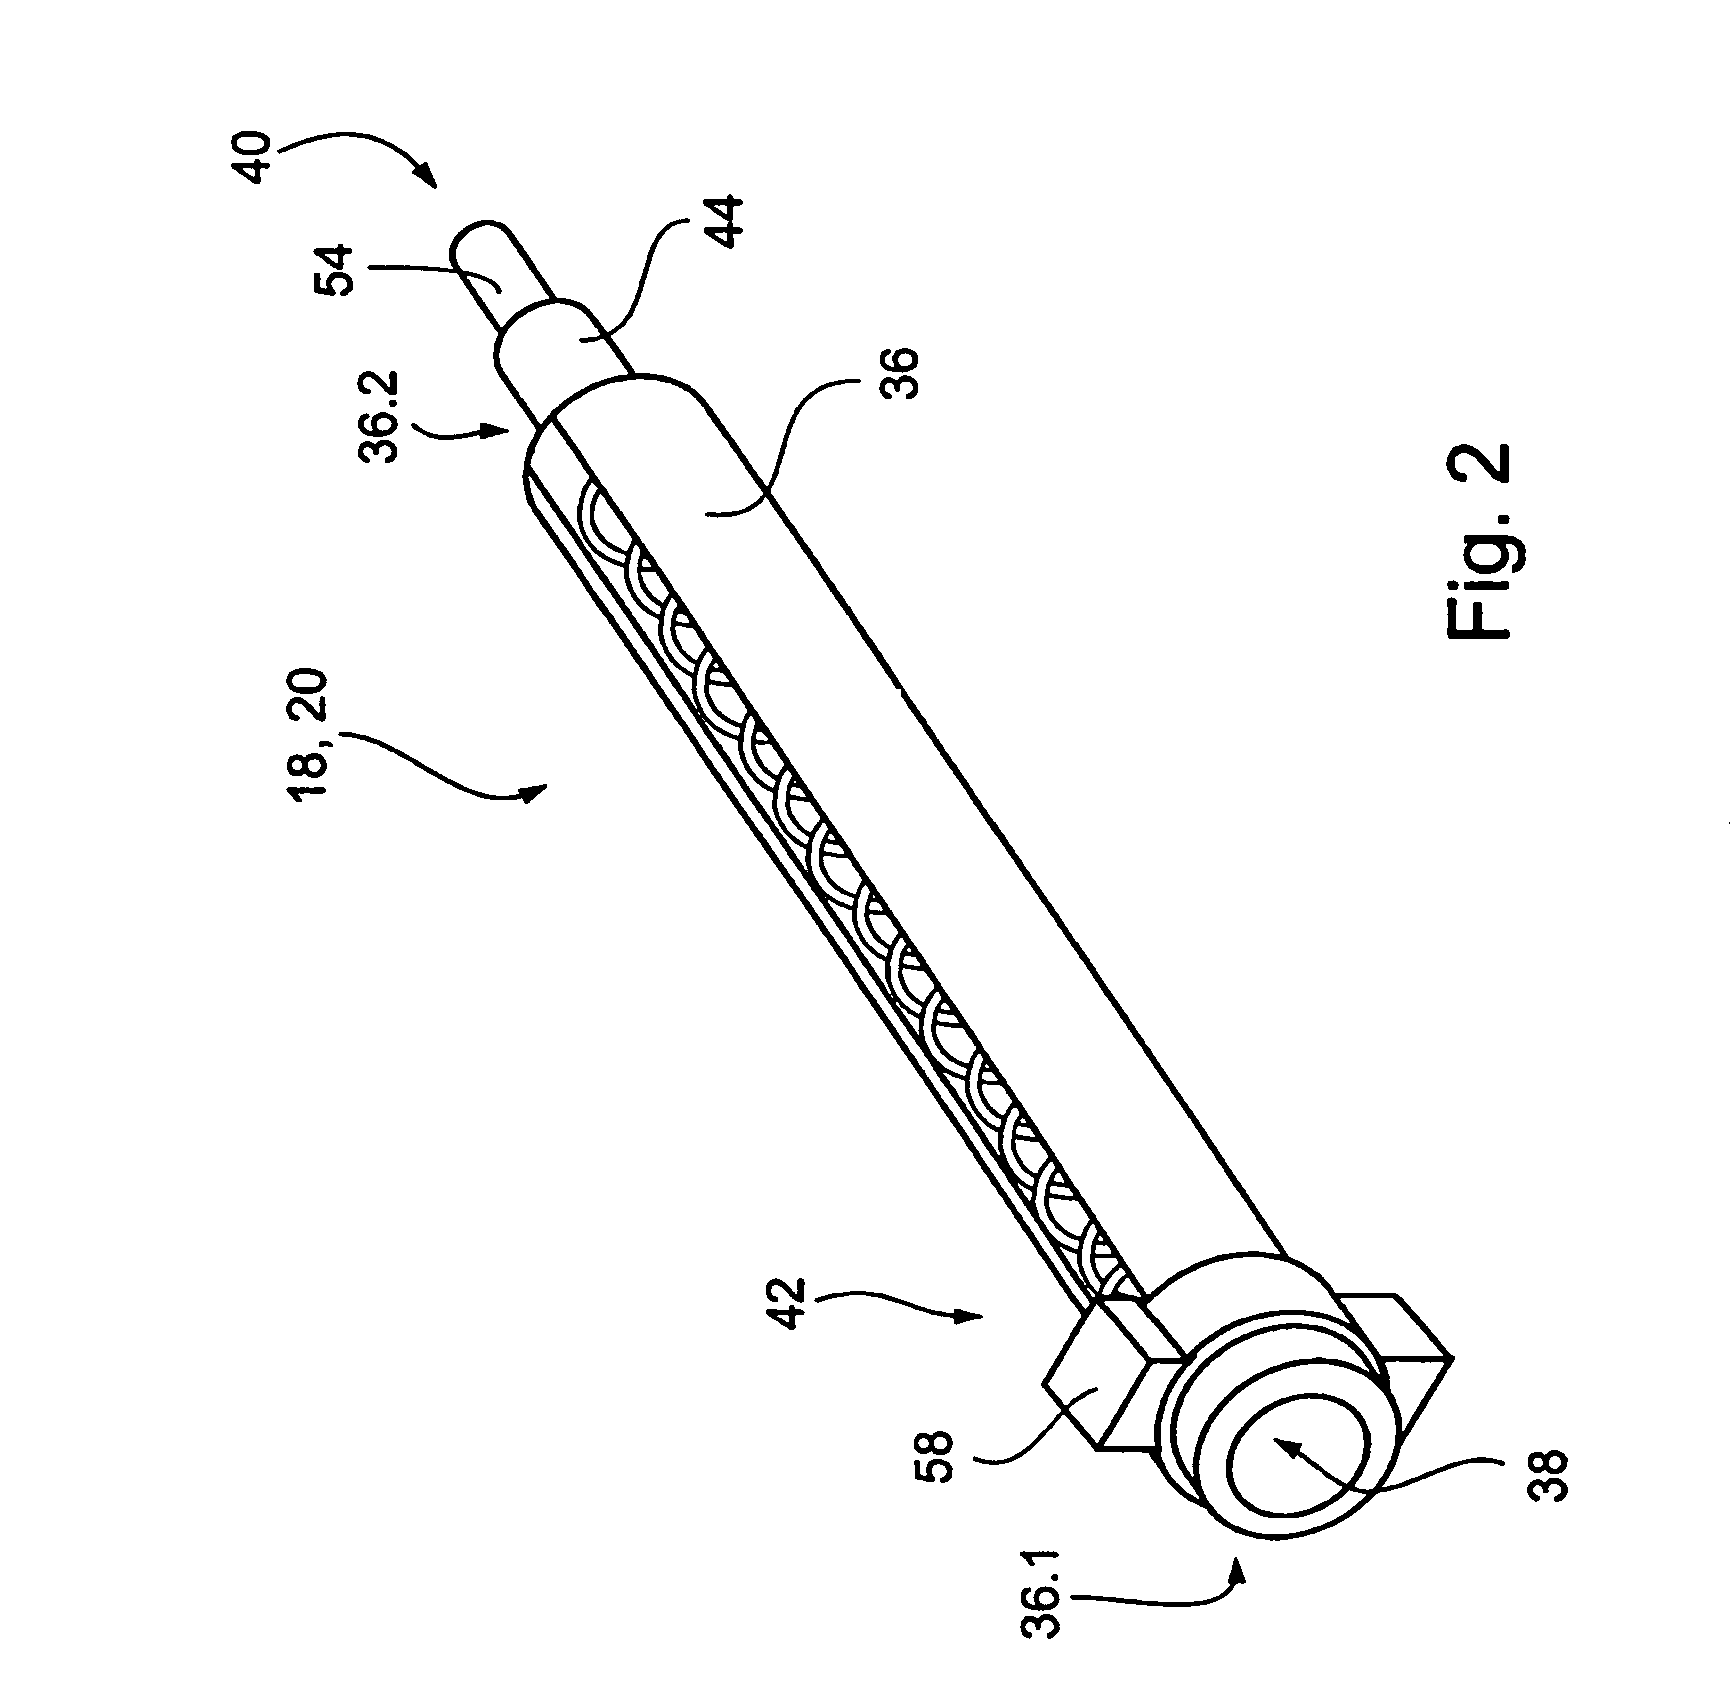 Guidewire management devices and methods